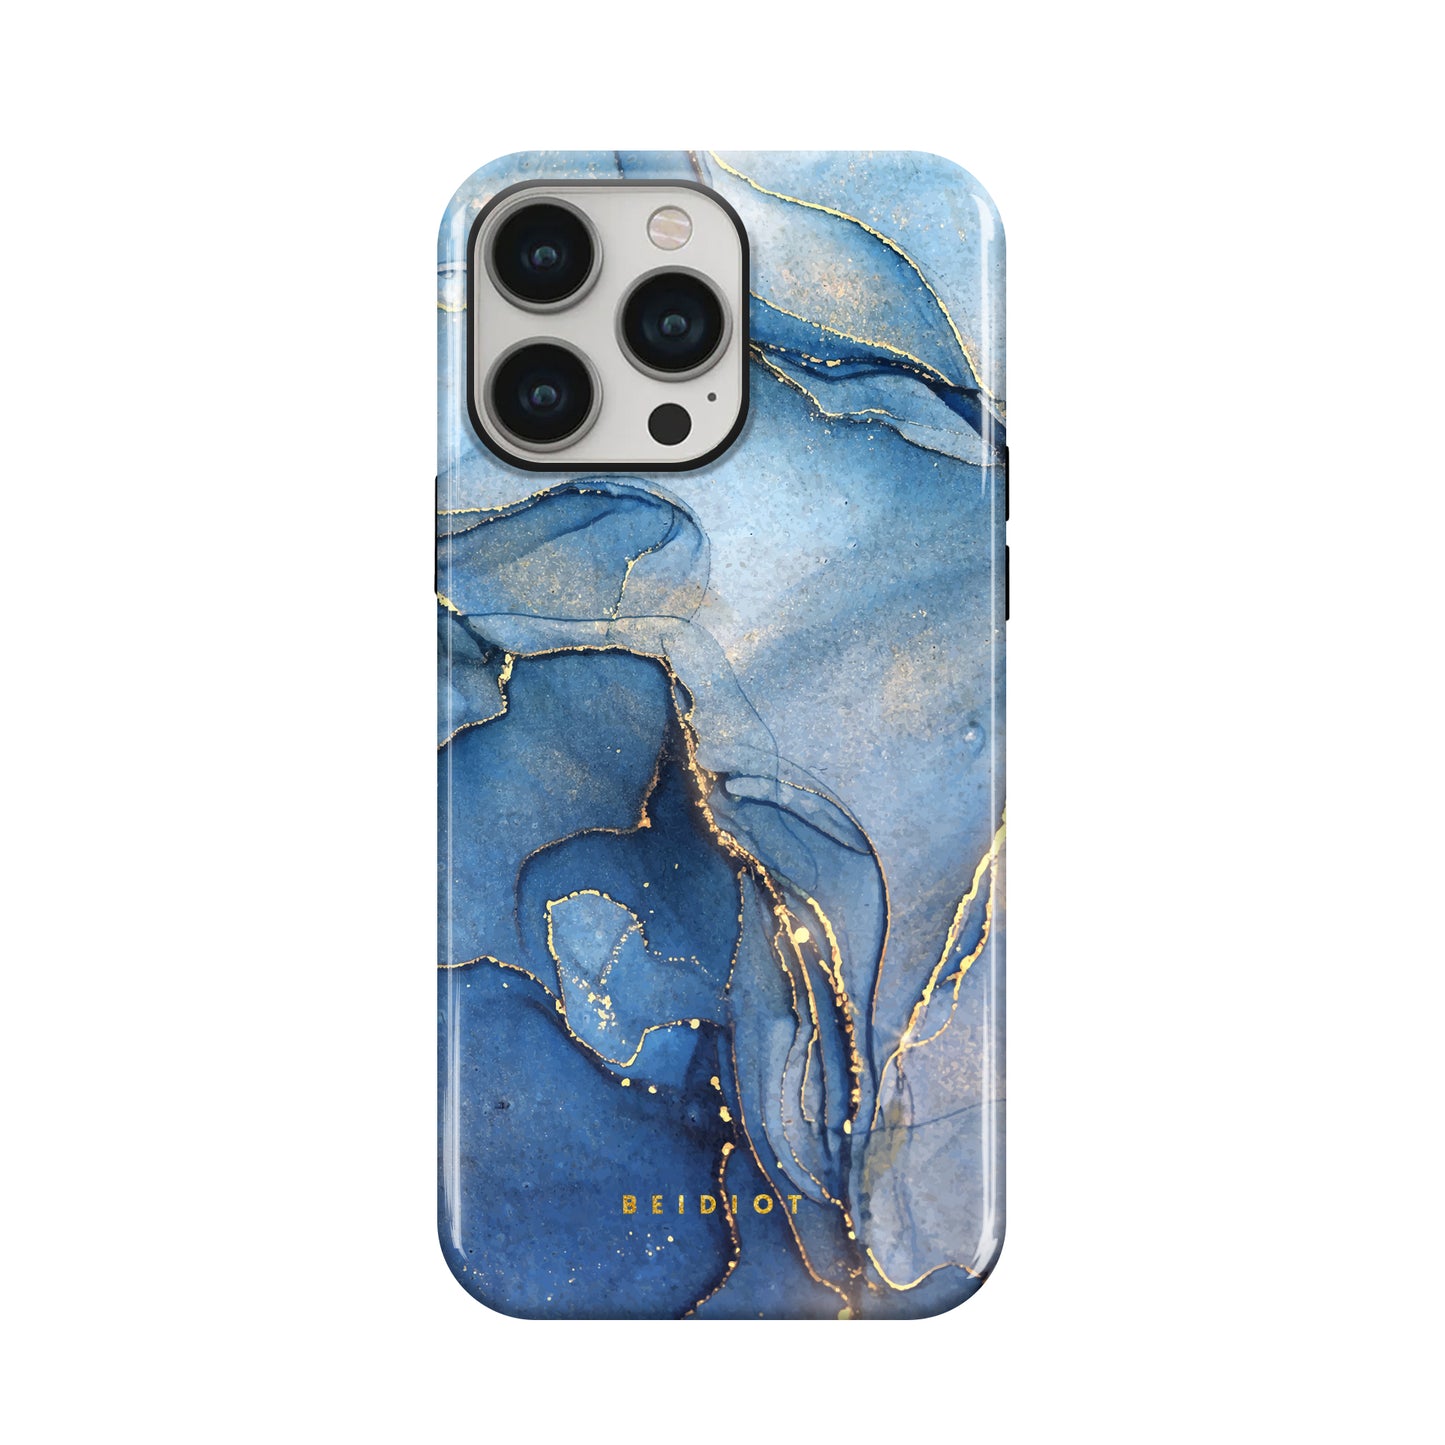 Shimmering Seas iPhone Case